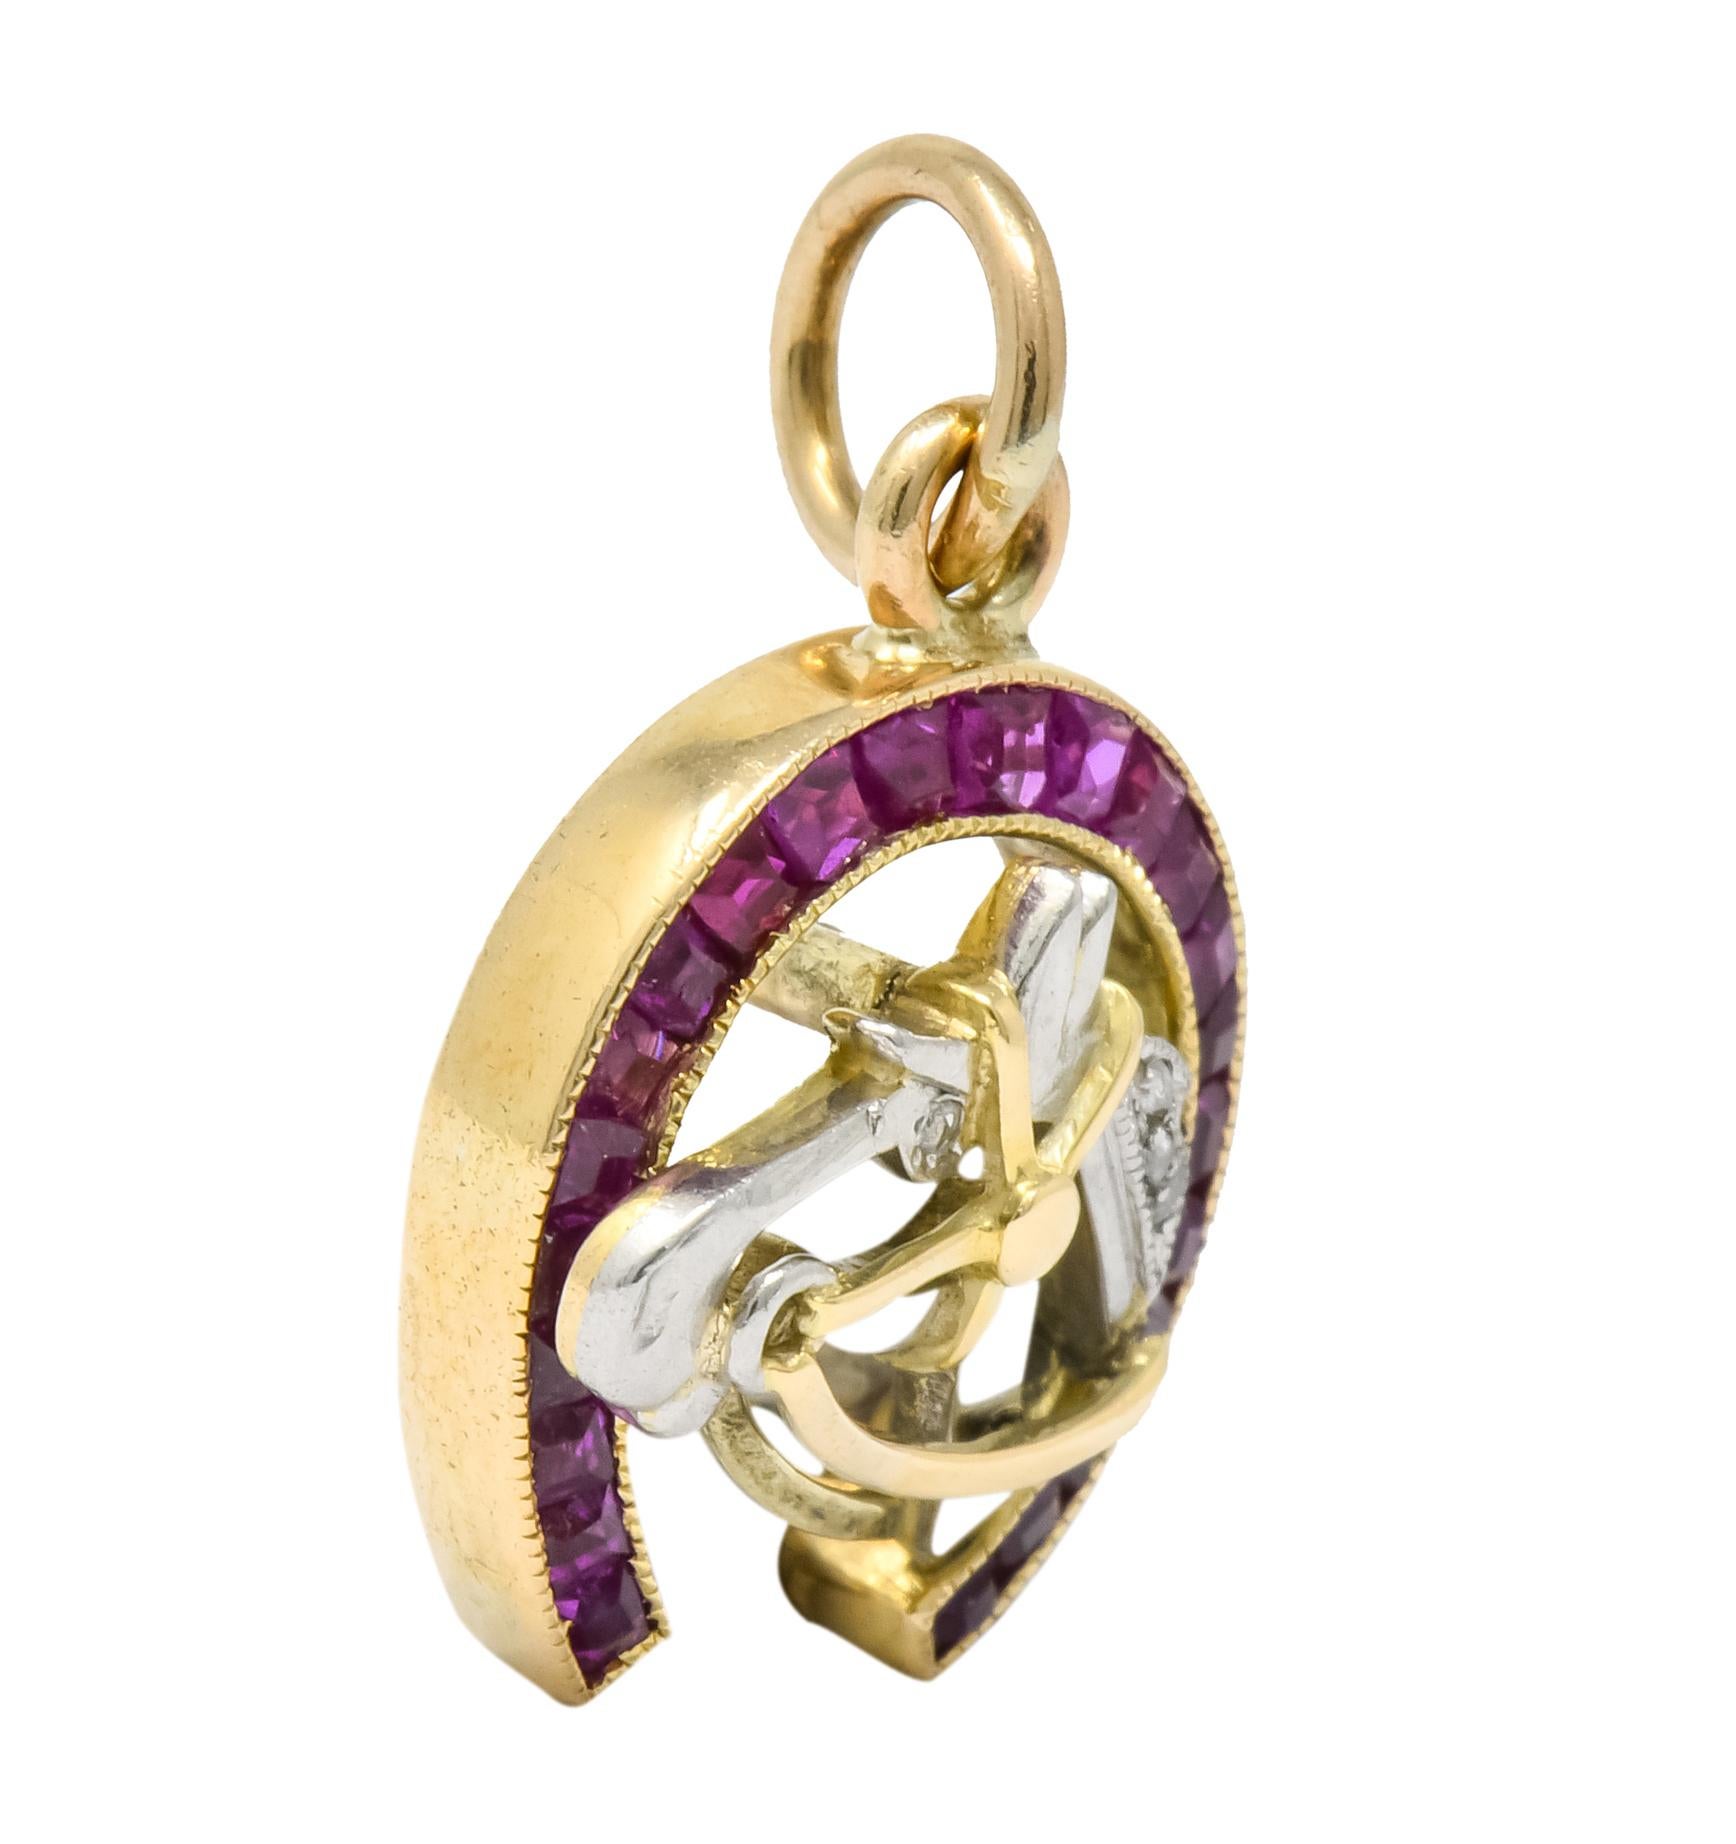 Featuring an 18 karat gold horseshoe with an applied platinum profile of a horse 

Horseshoe contains 1.0 carat total of calibré cut rubies, deep raspberry red and very well matched 

Platinum profile of horse contains 0.03 carat total of bead set